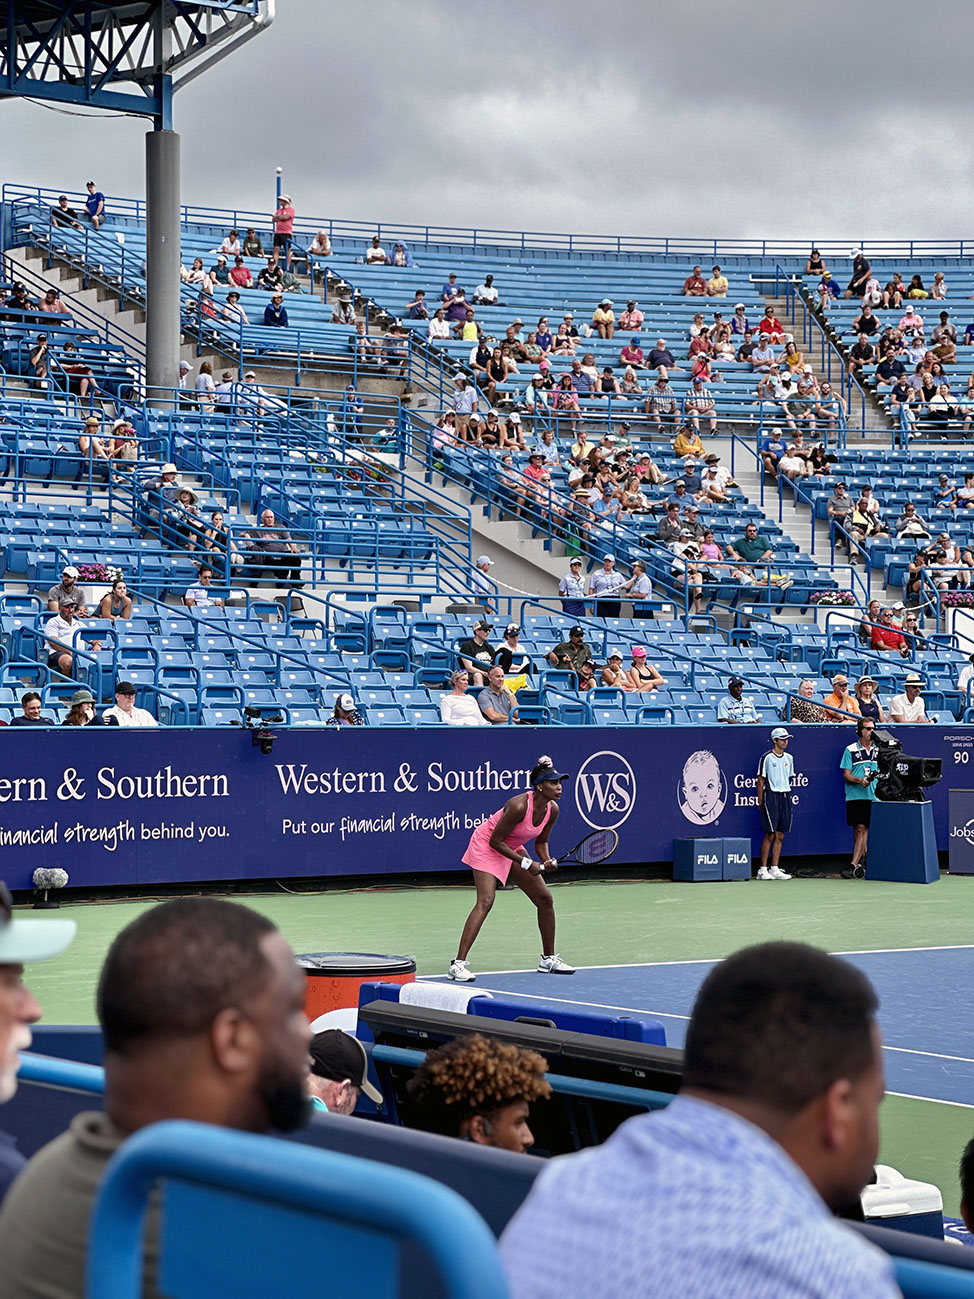 How to plan a trip to the Cincy Open tennis tournament